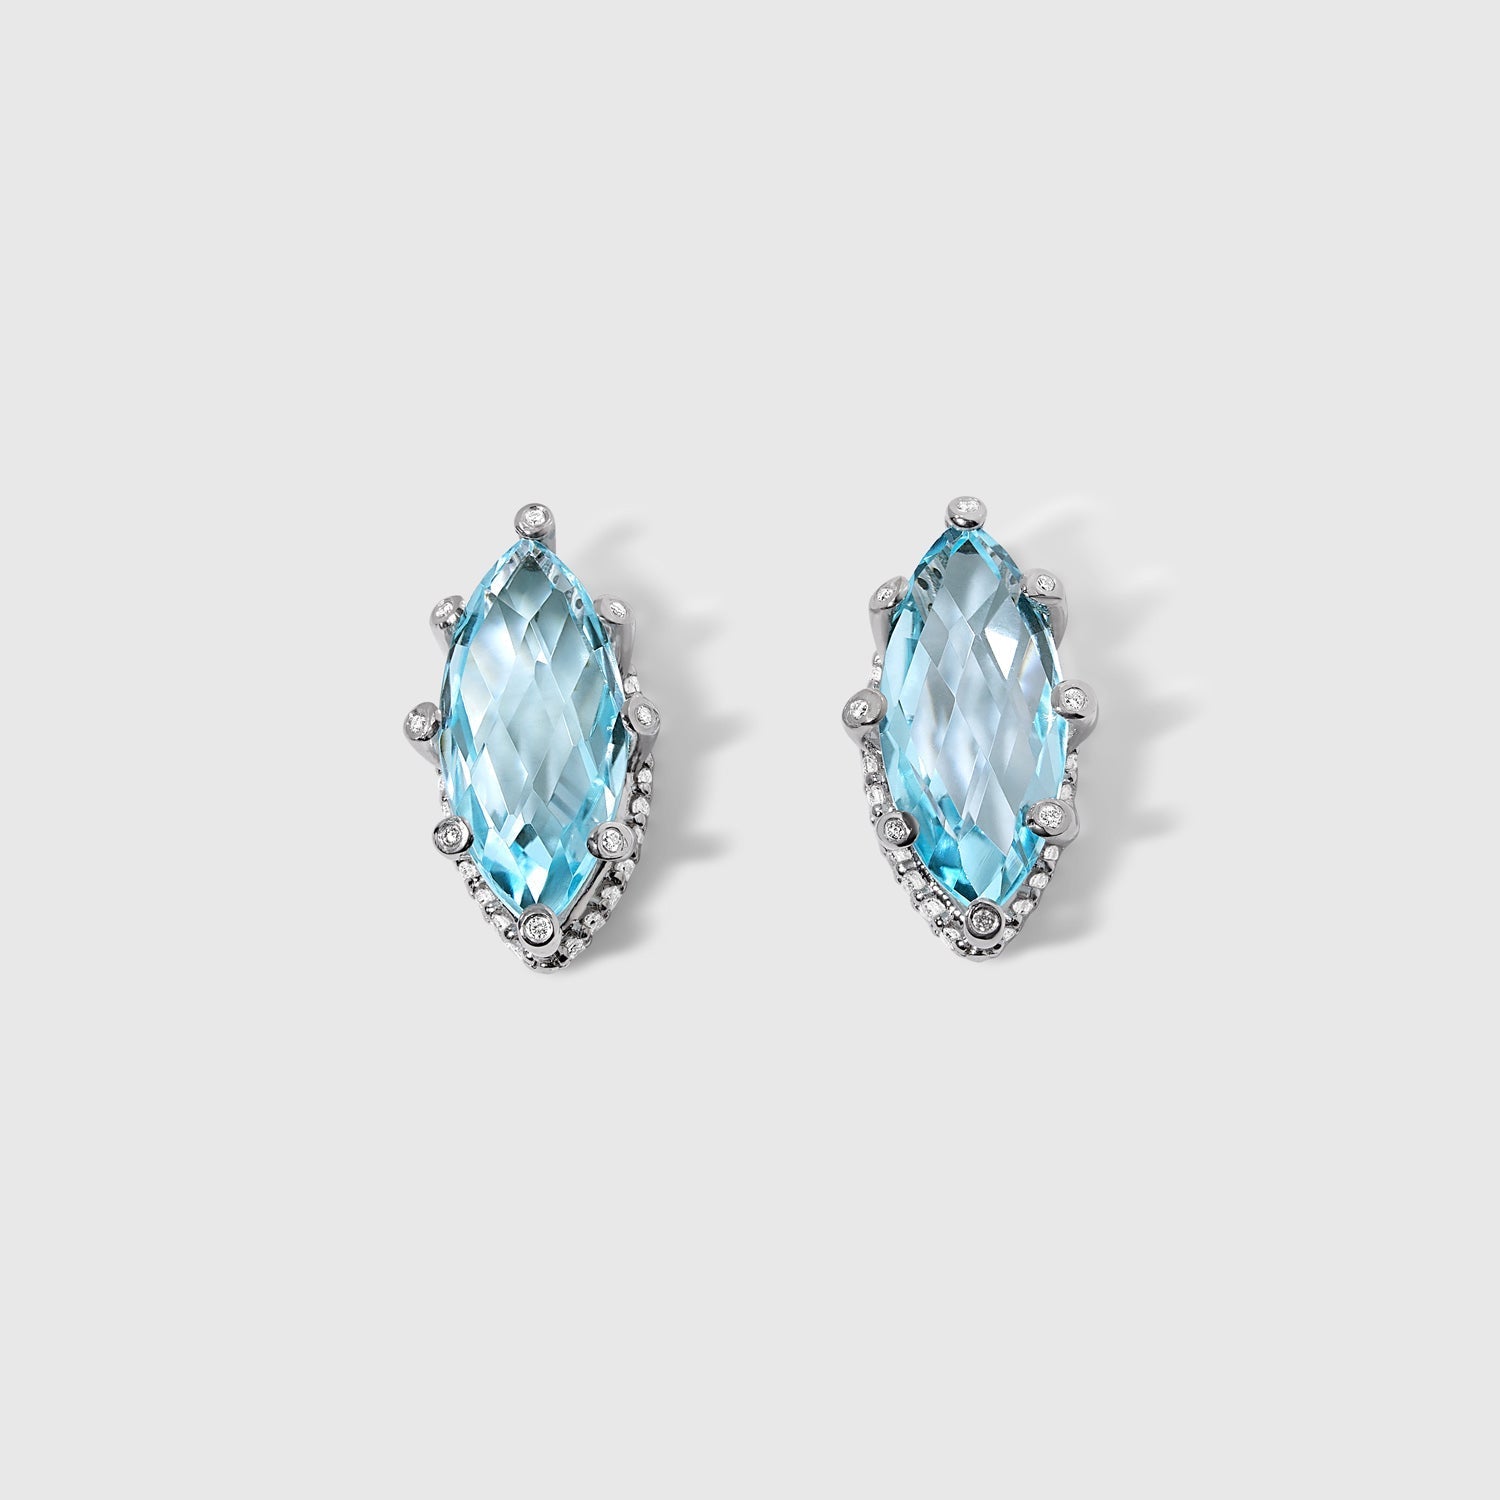 Sky-Blue Topaz & White Diamonds - Marquise Stud Earrings in Solid White Gold – SkyTower Set - Aurora Laffite Jewelry